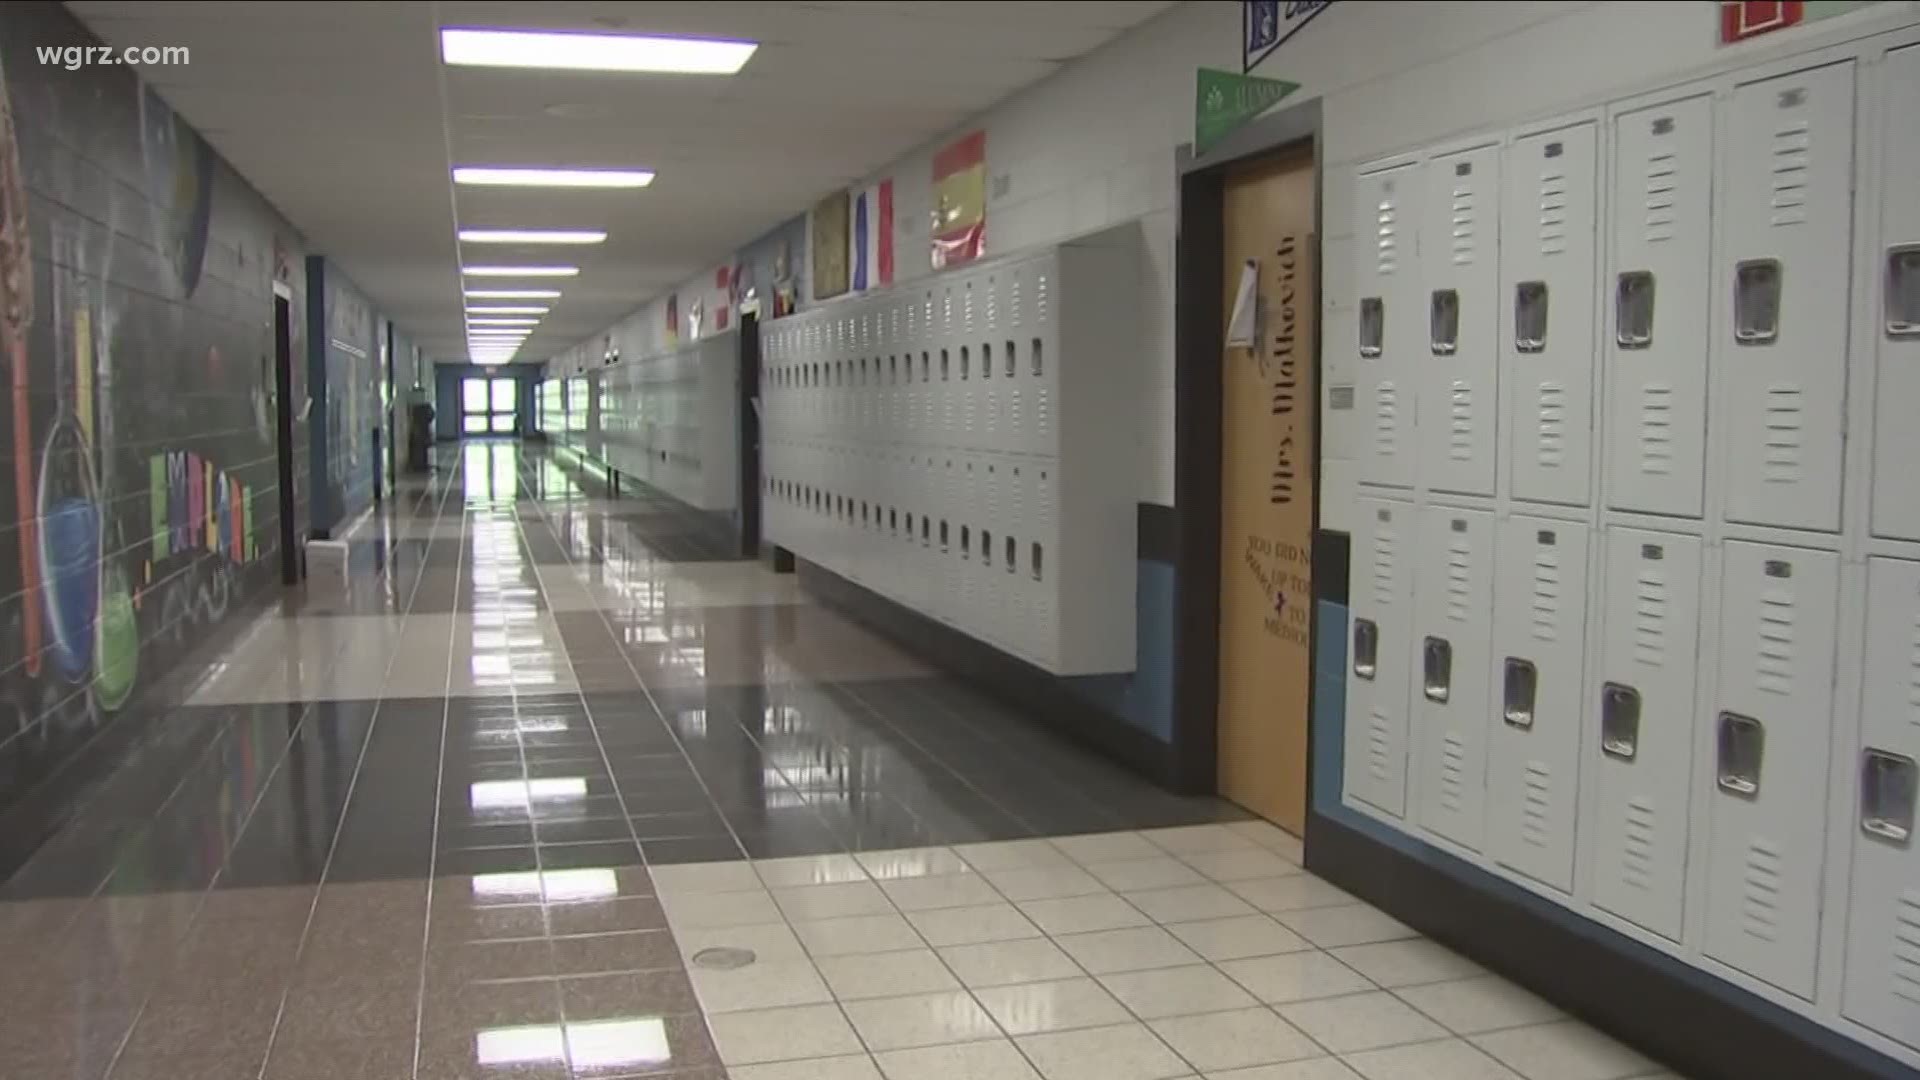 schools will have to come up with plans to re-open this fall.